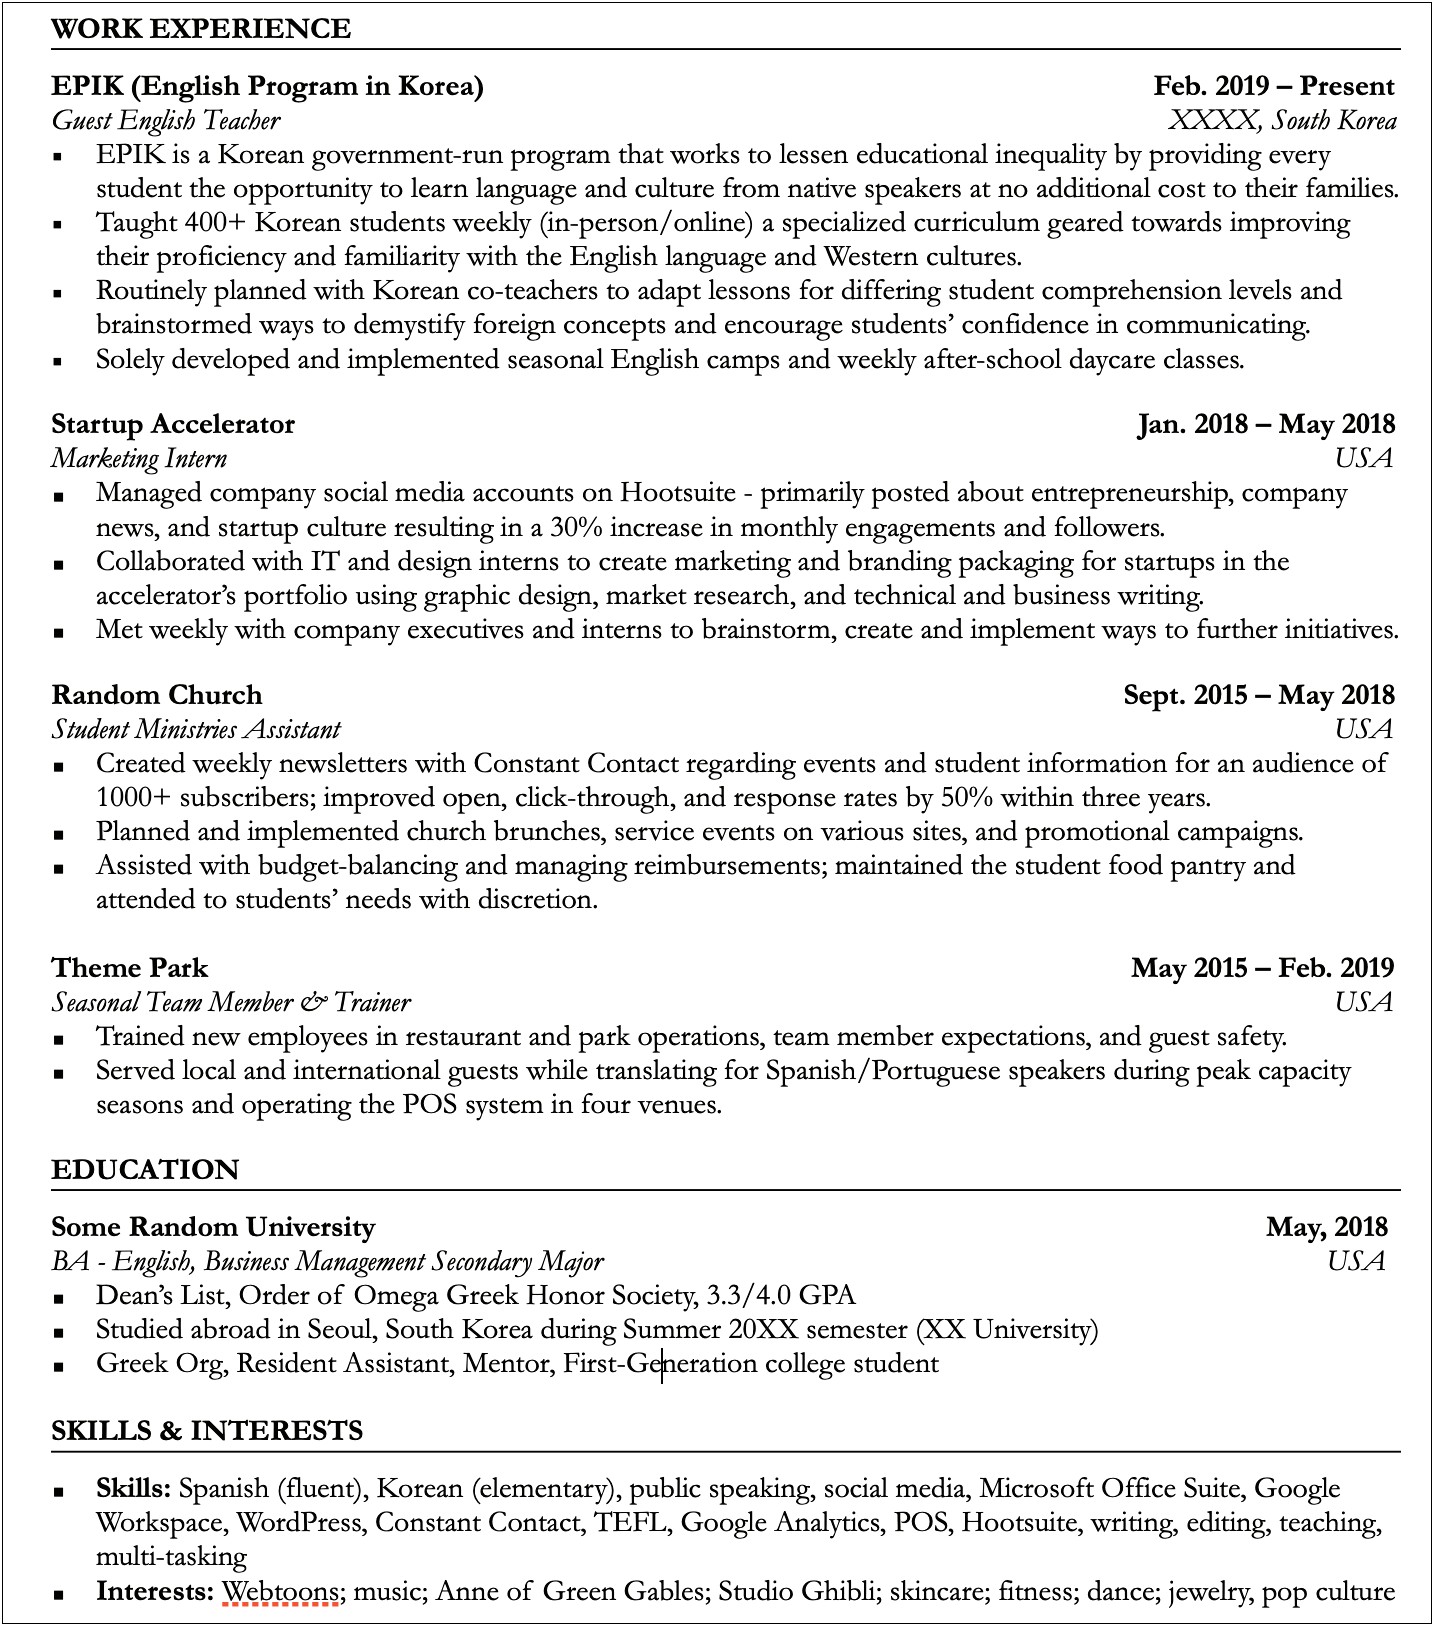 Theme Park Experience On A Resume Food Service